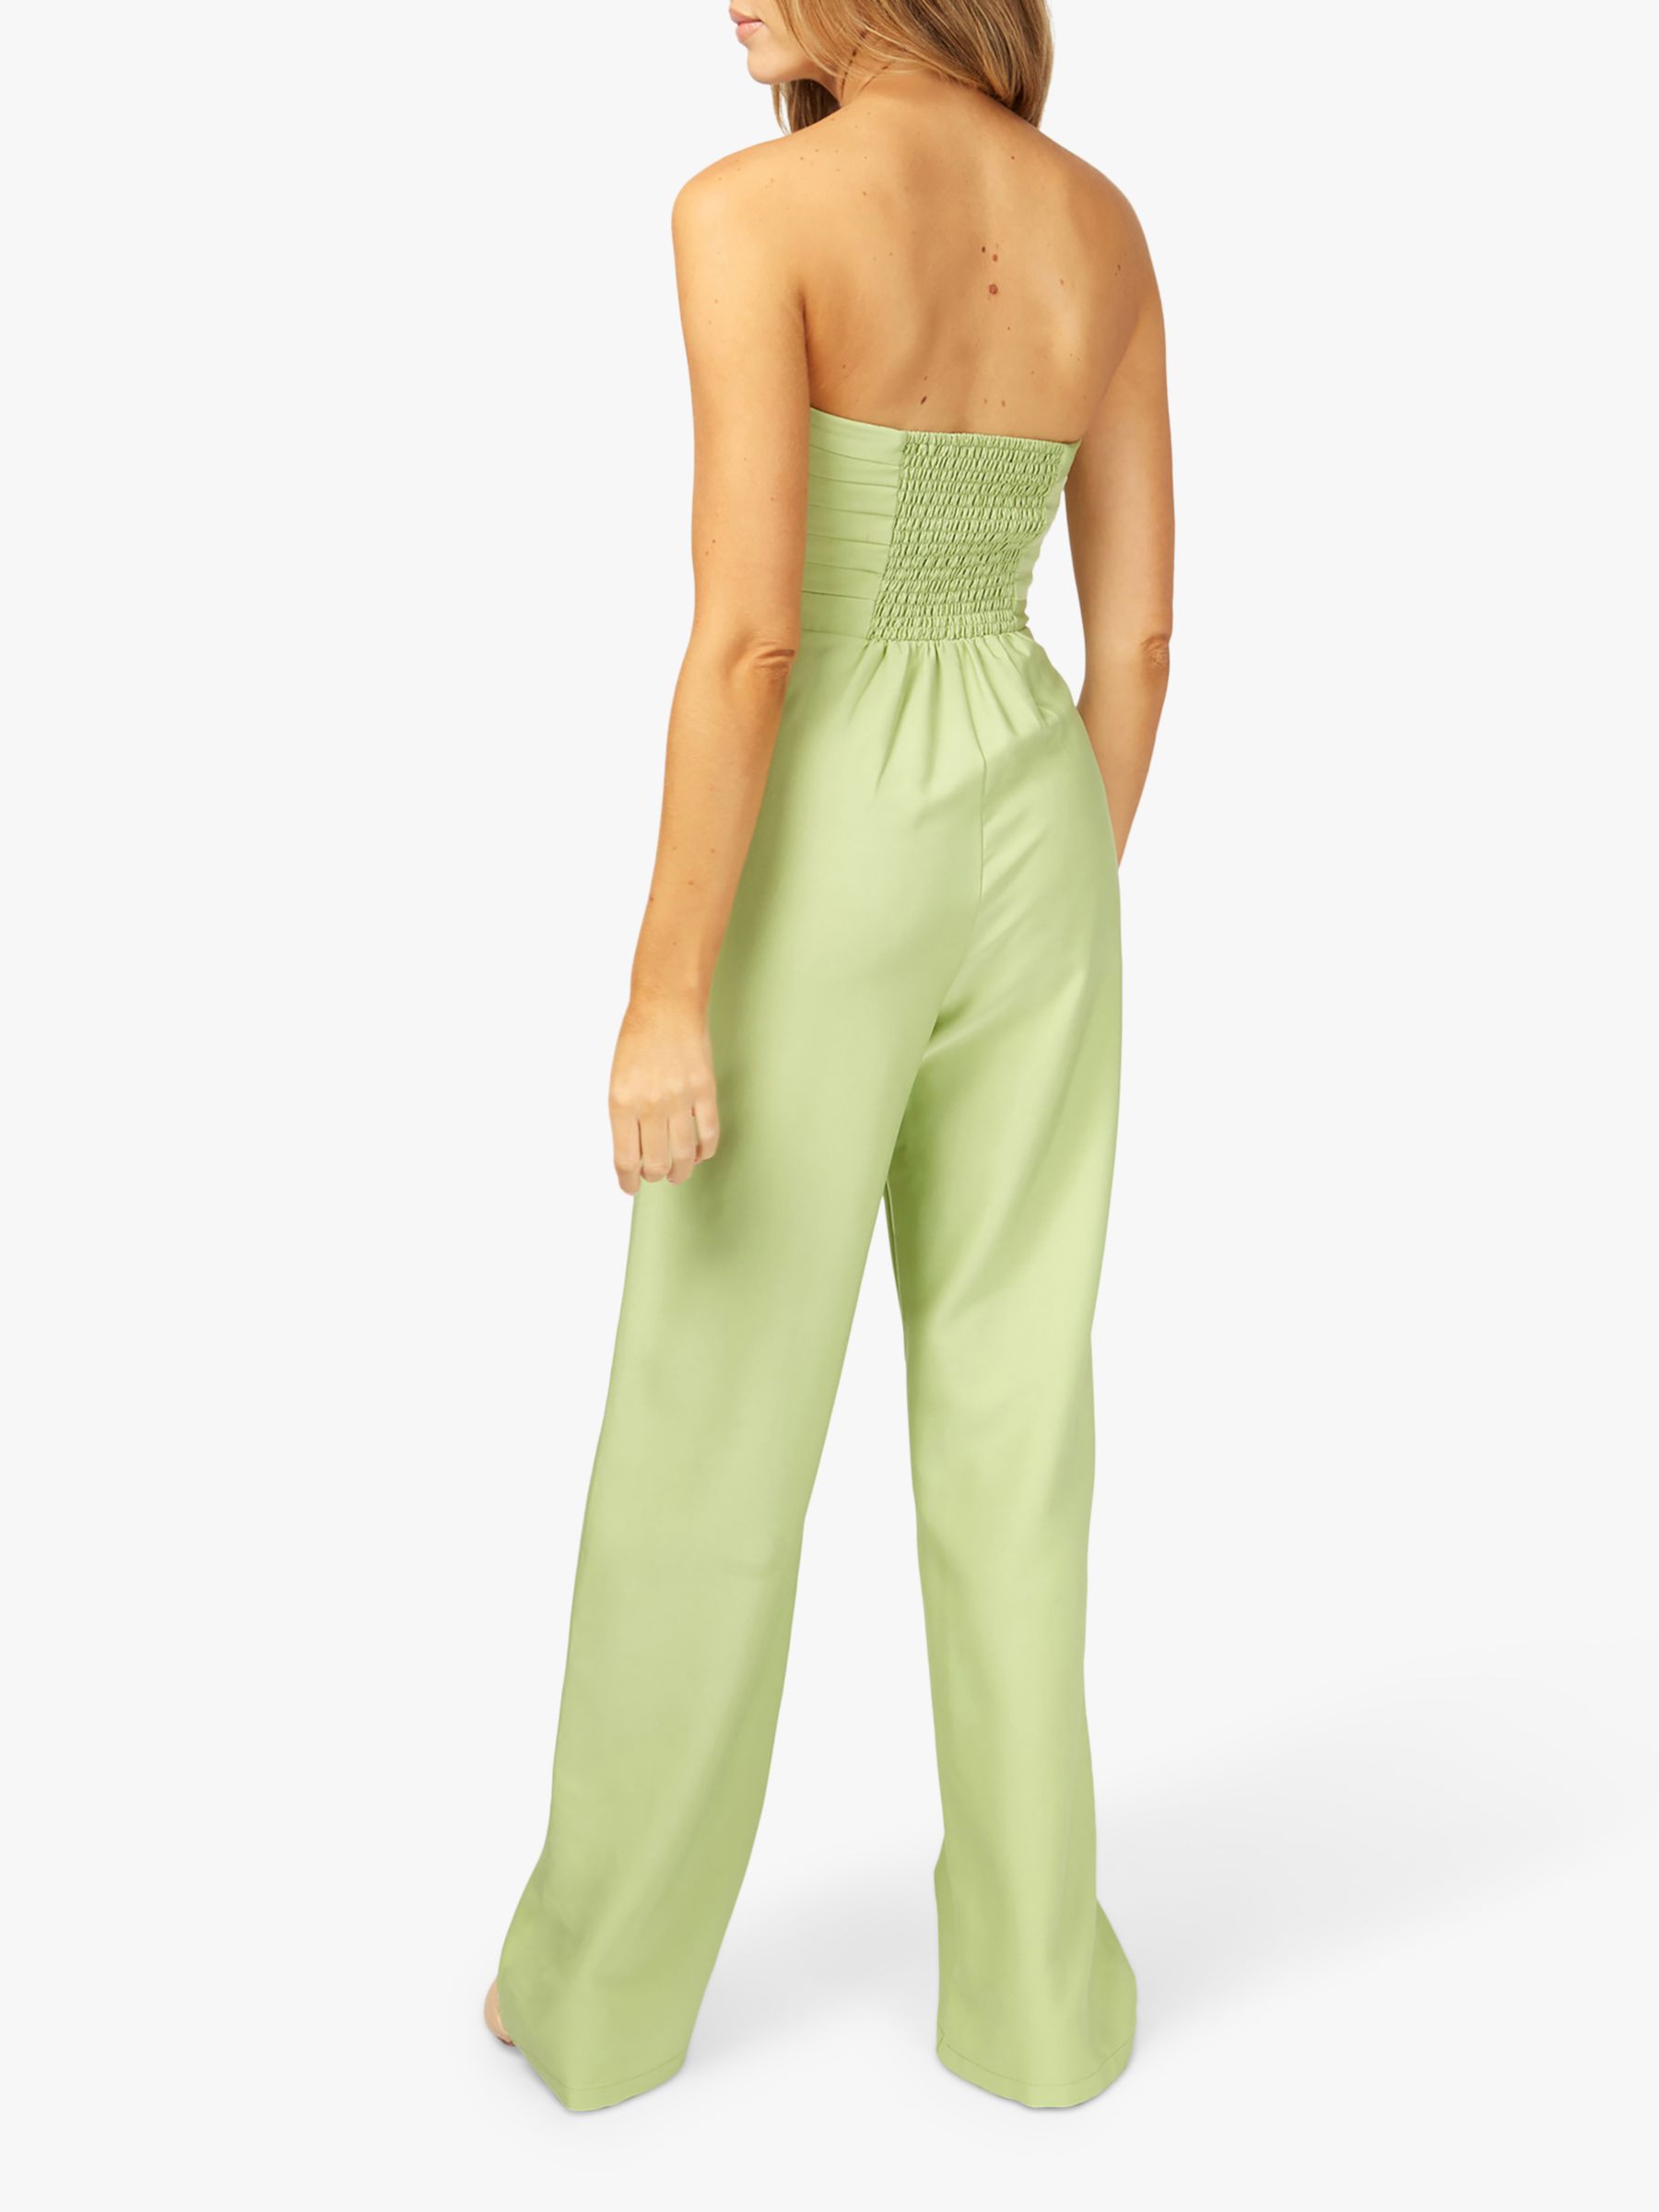 Belmore Olive Green Ribbed Sleeveless Jumpsuit